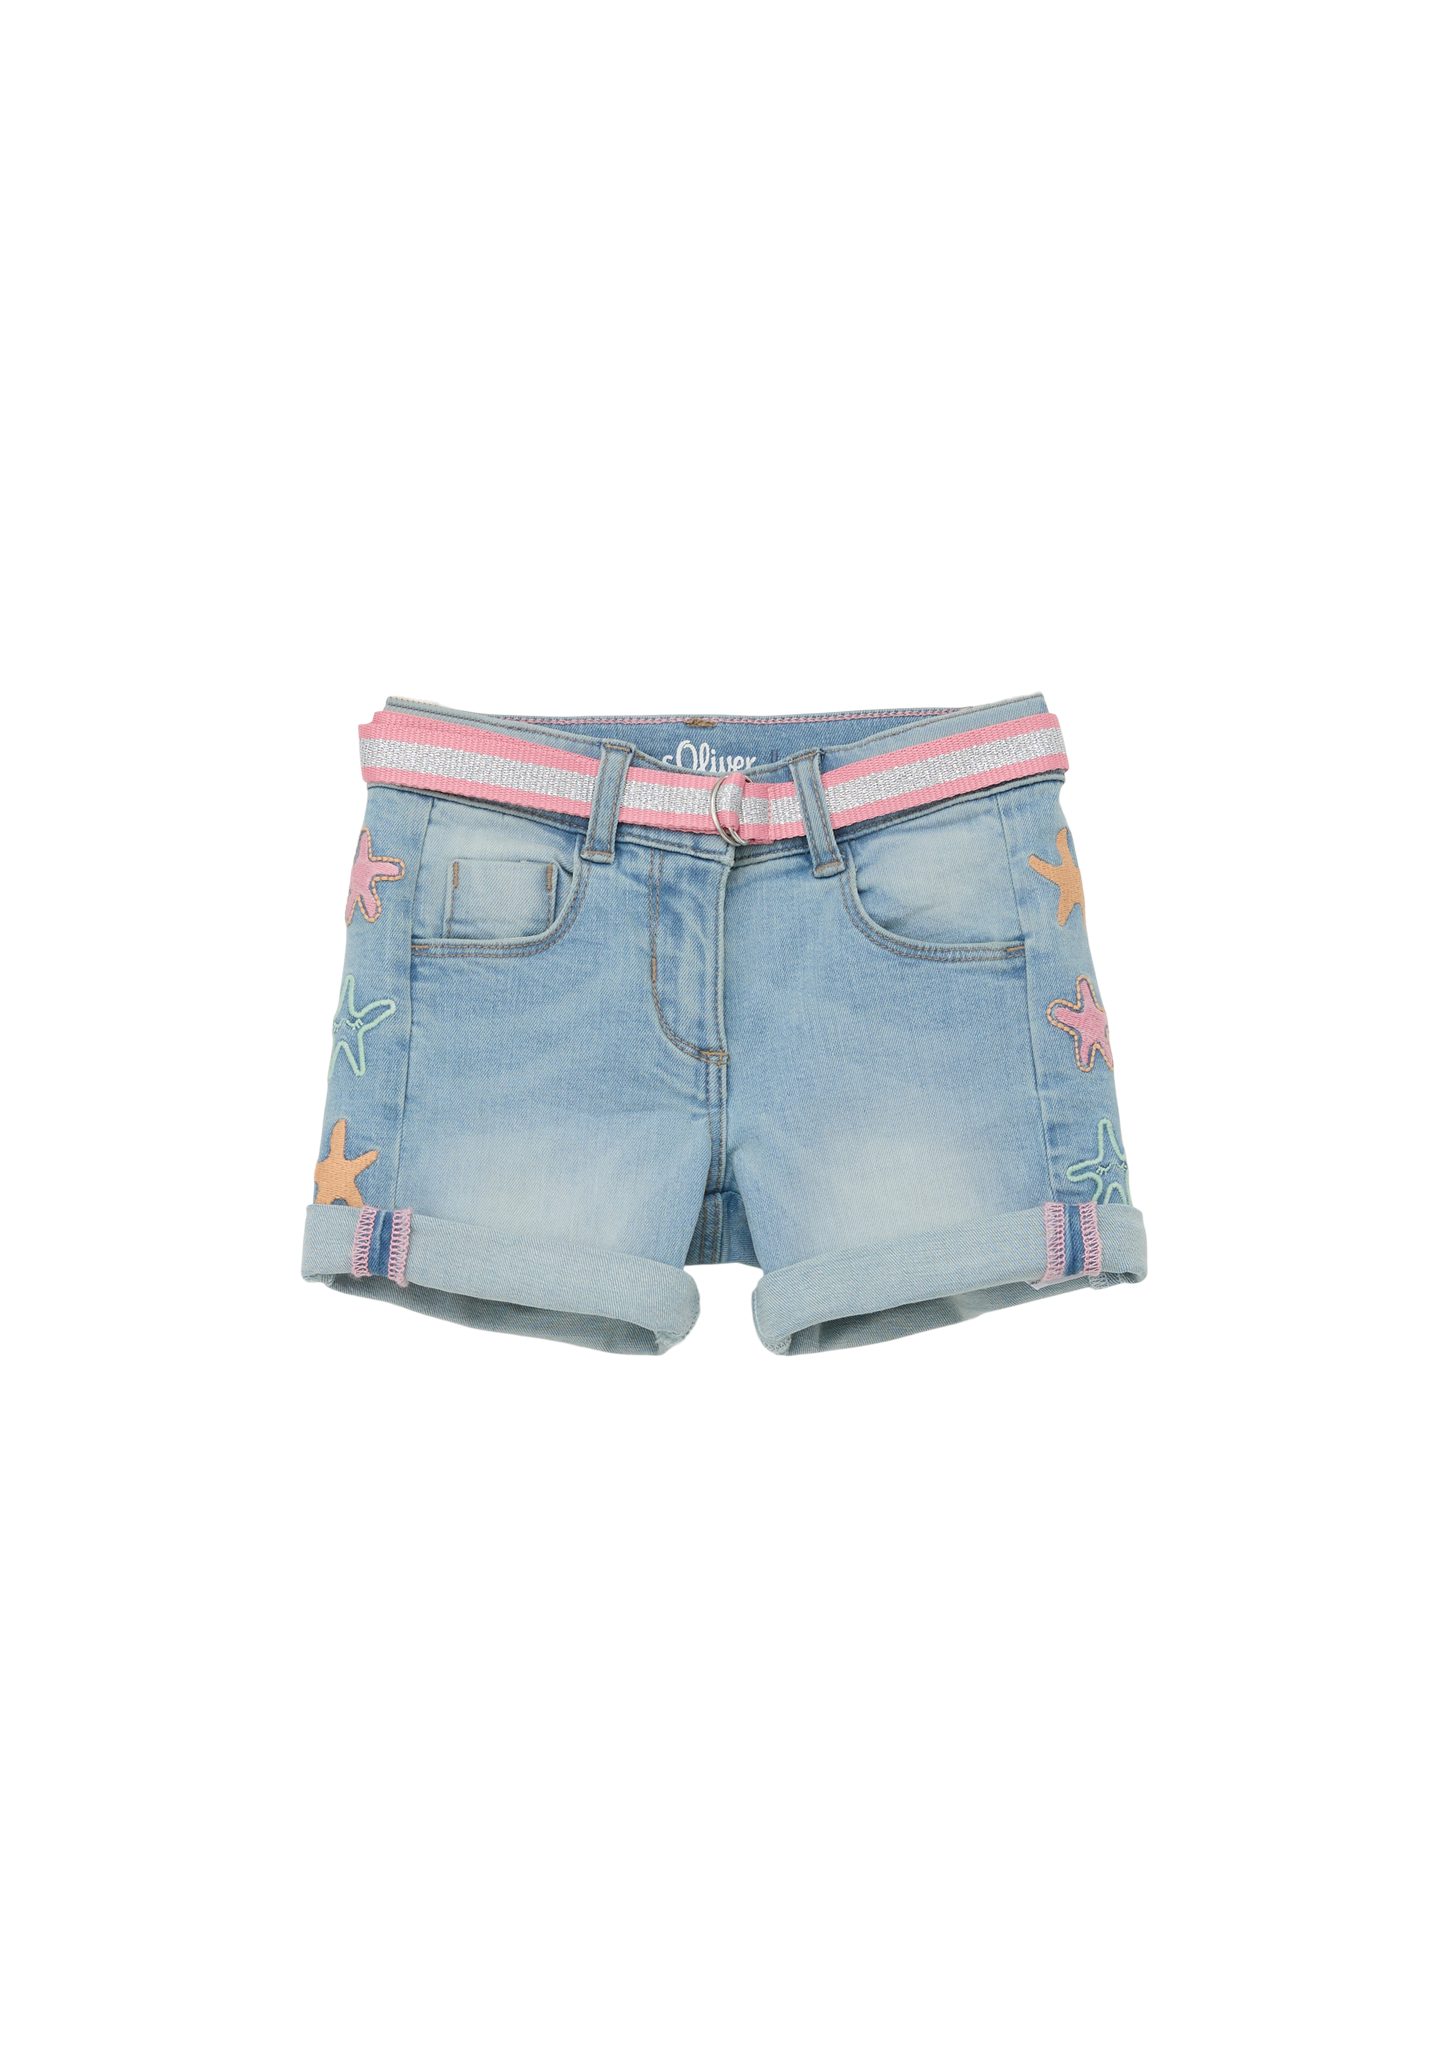 Fit Jeans-Shorts / Regular / s.Oliver Jeansshorts Rise Waschung Stickerei, / Straight Mid Leg